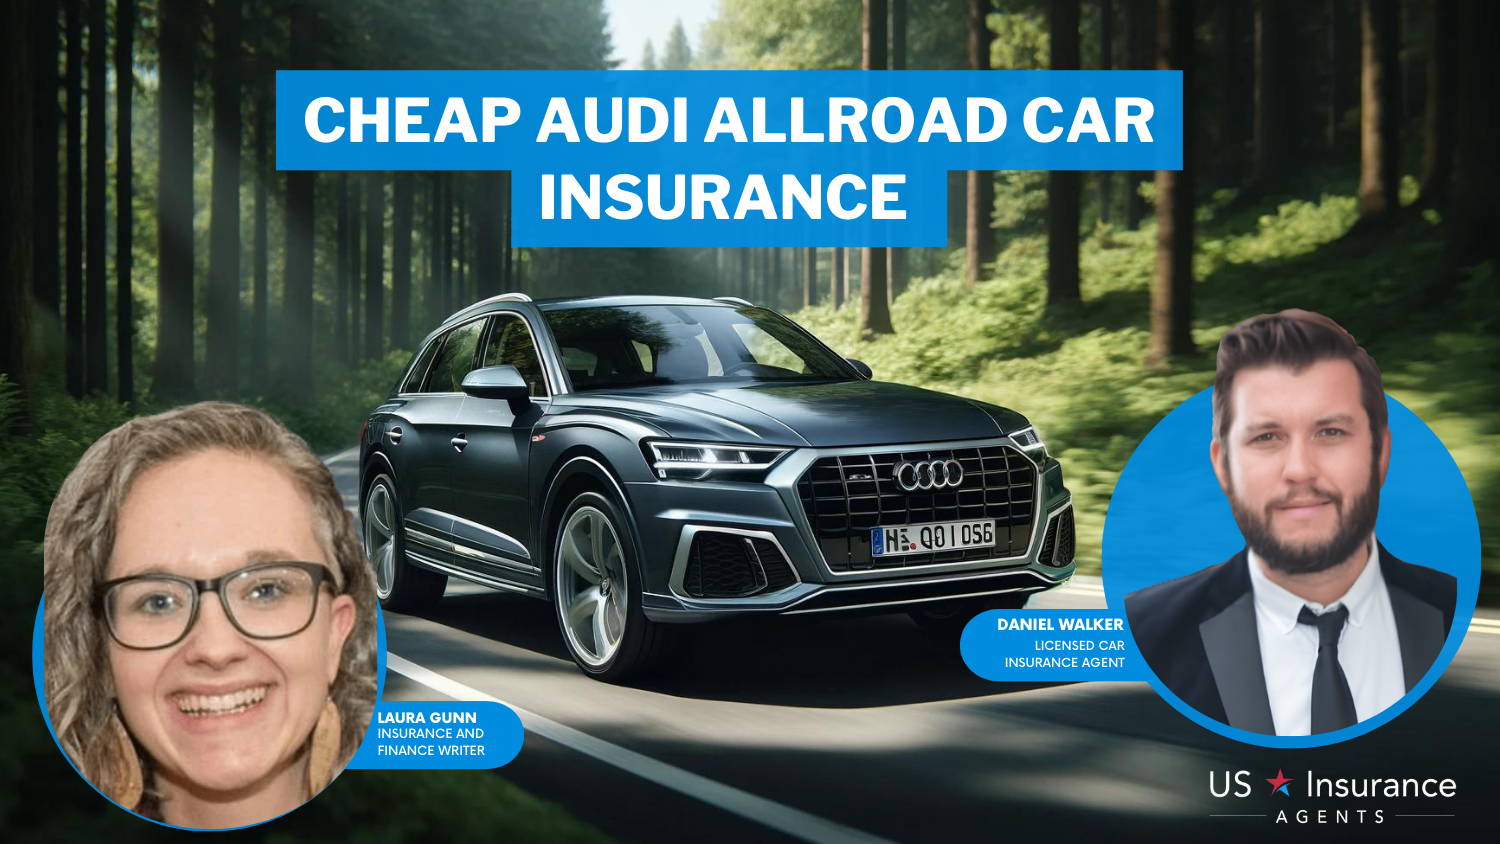 State Farm, AAA, and Allstate: Cheap Audi Allroad Car Insurance